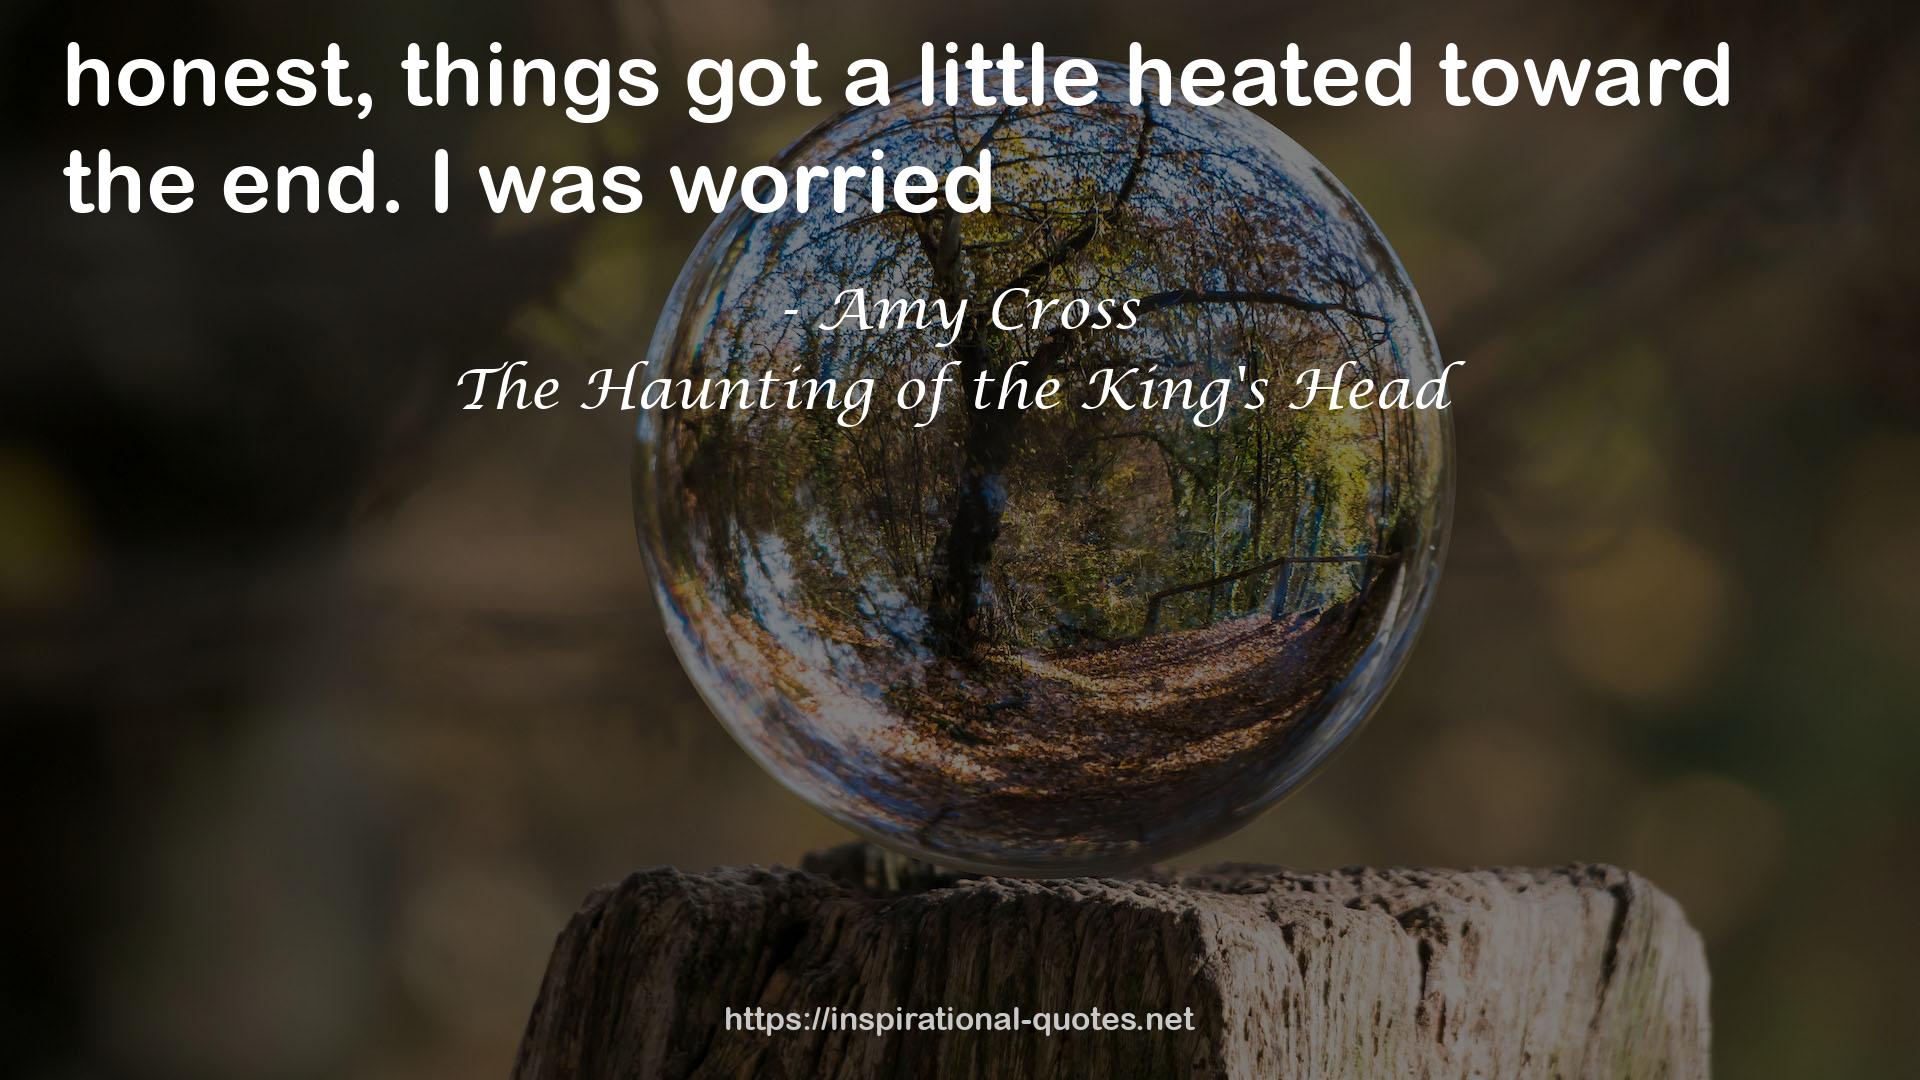 The Haunting of the King's Head QUOTES